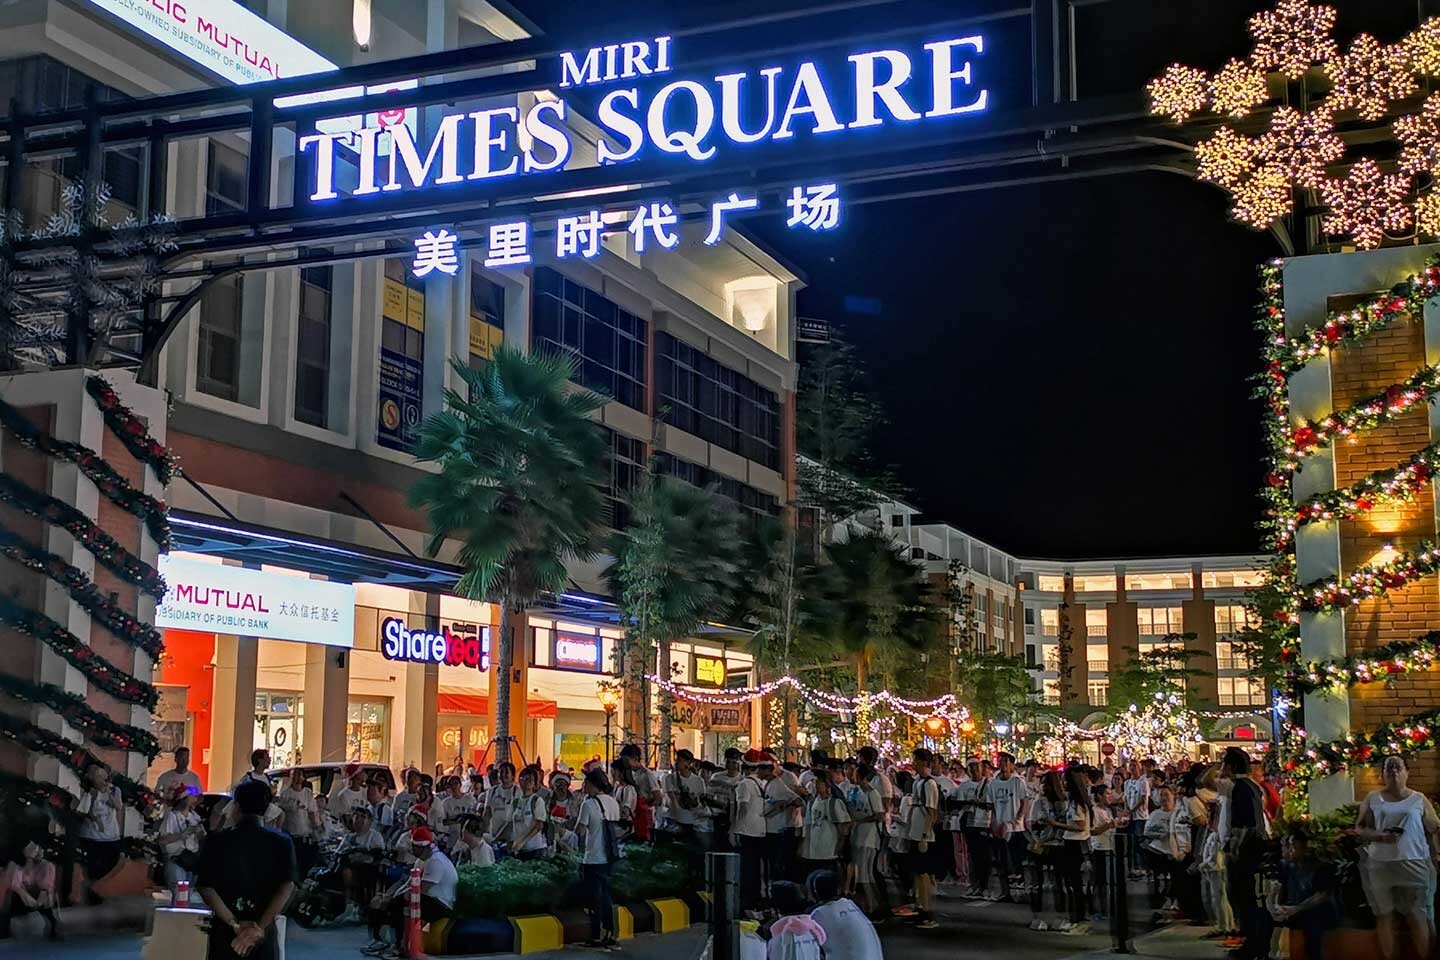 Explore the eclectic mix of bars and cafes at Miri Times Square, perfect for a night out with friends